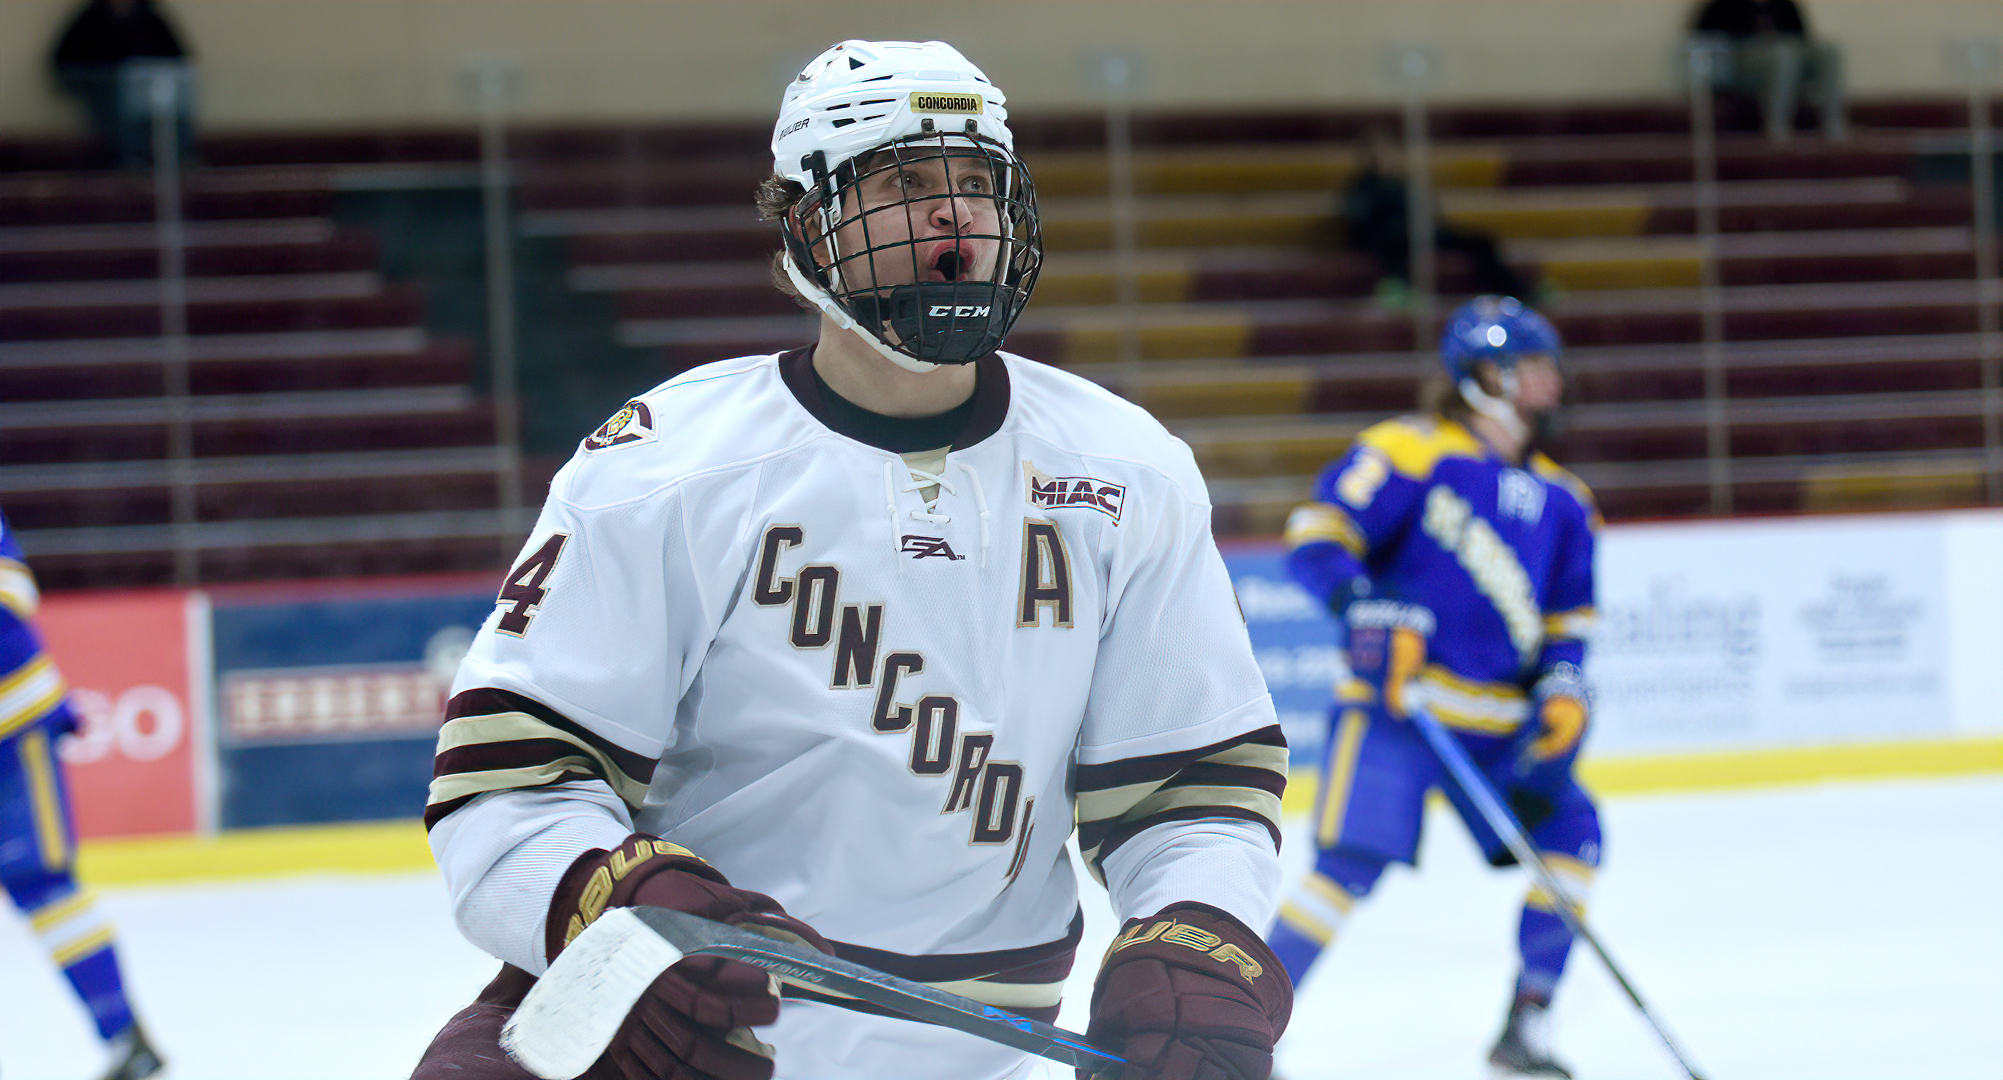 Senior Tanner Breidenbach celebrates his goal in the second period in the Cobbers' 4-2 win over St. Scholastica. He also had an assist in the game.